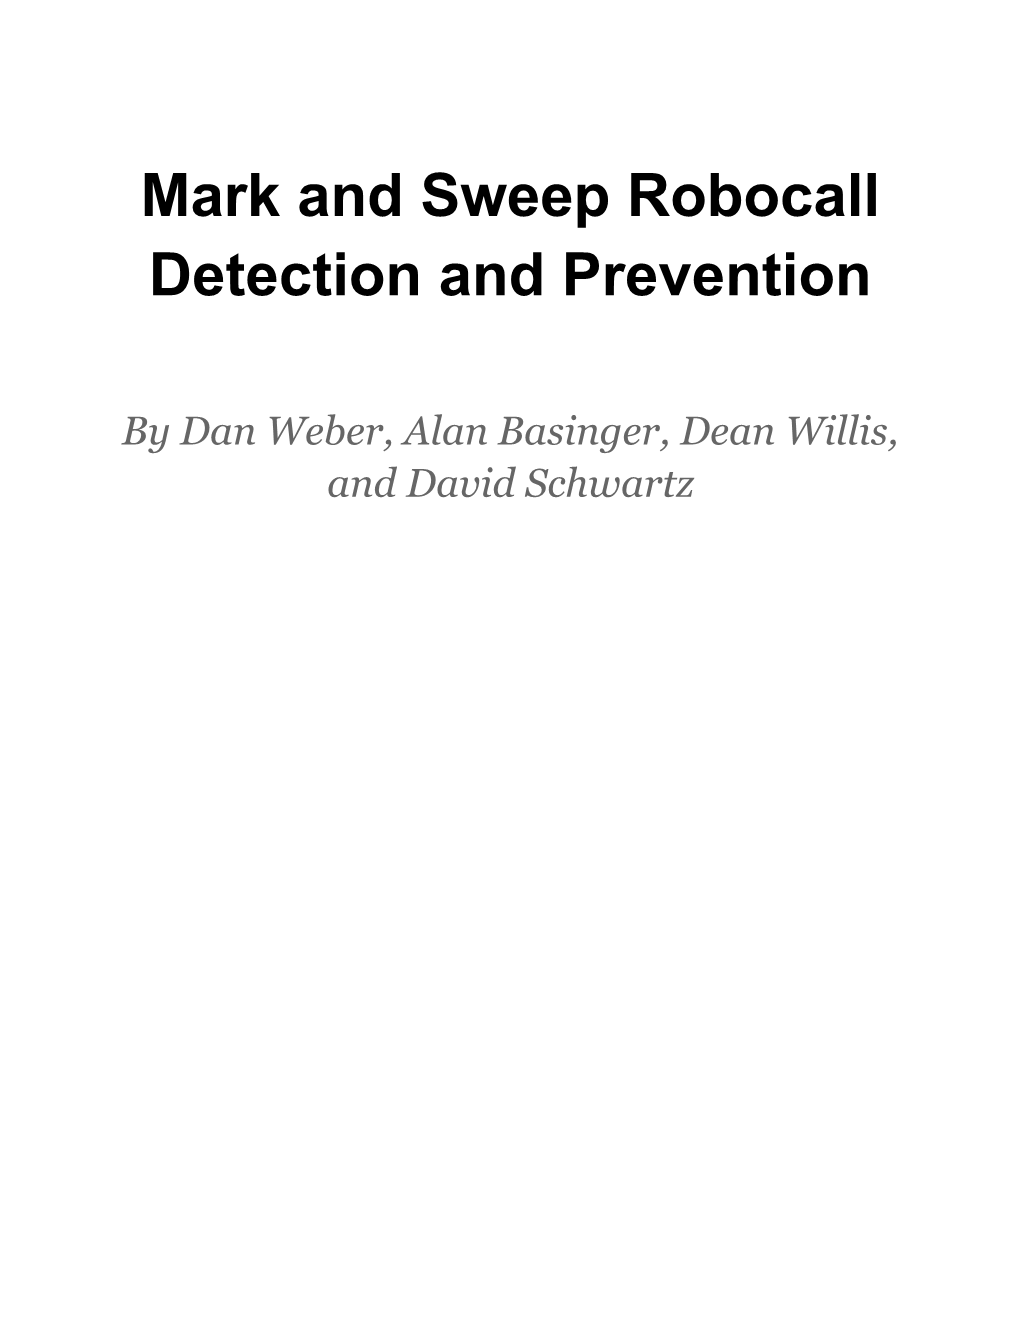 Mark and Sweep Robocall Detection and Prevention